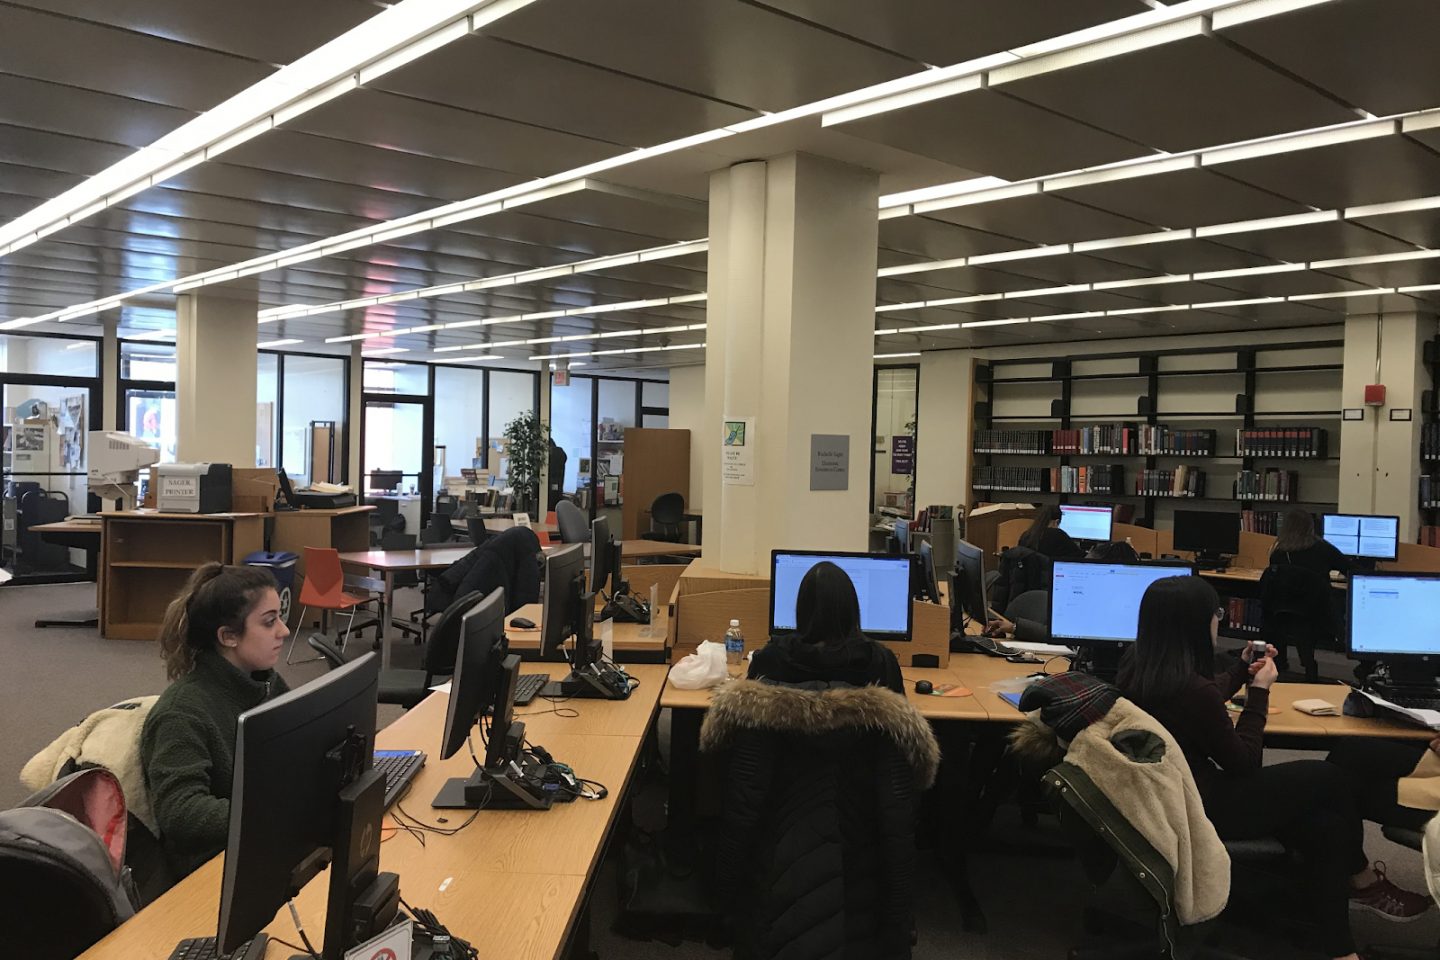 Students working on computers in the Sager Research Area in Swirbul Library